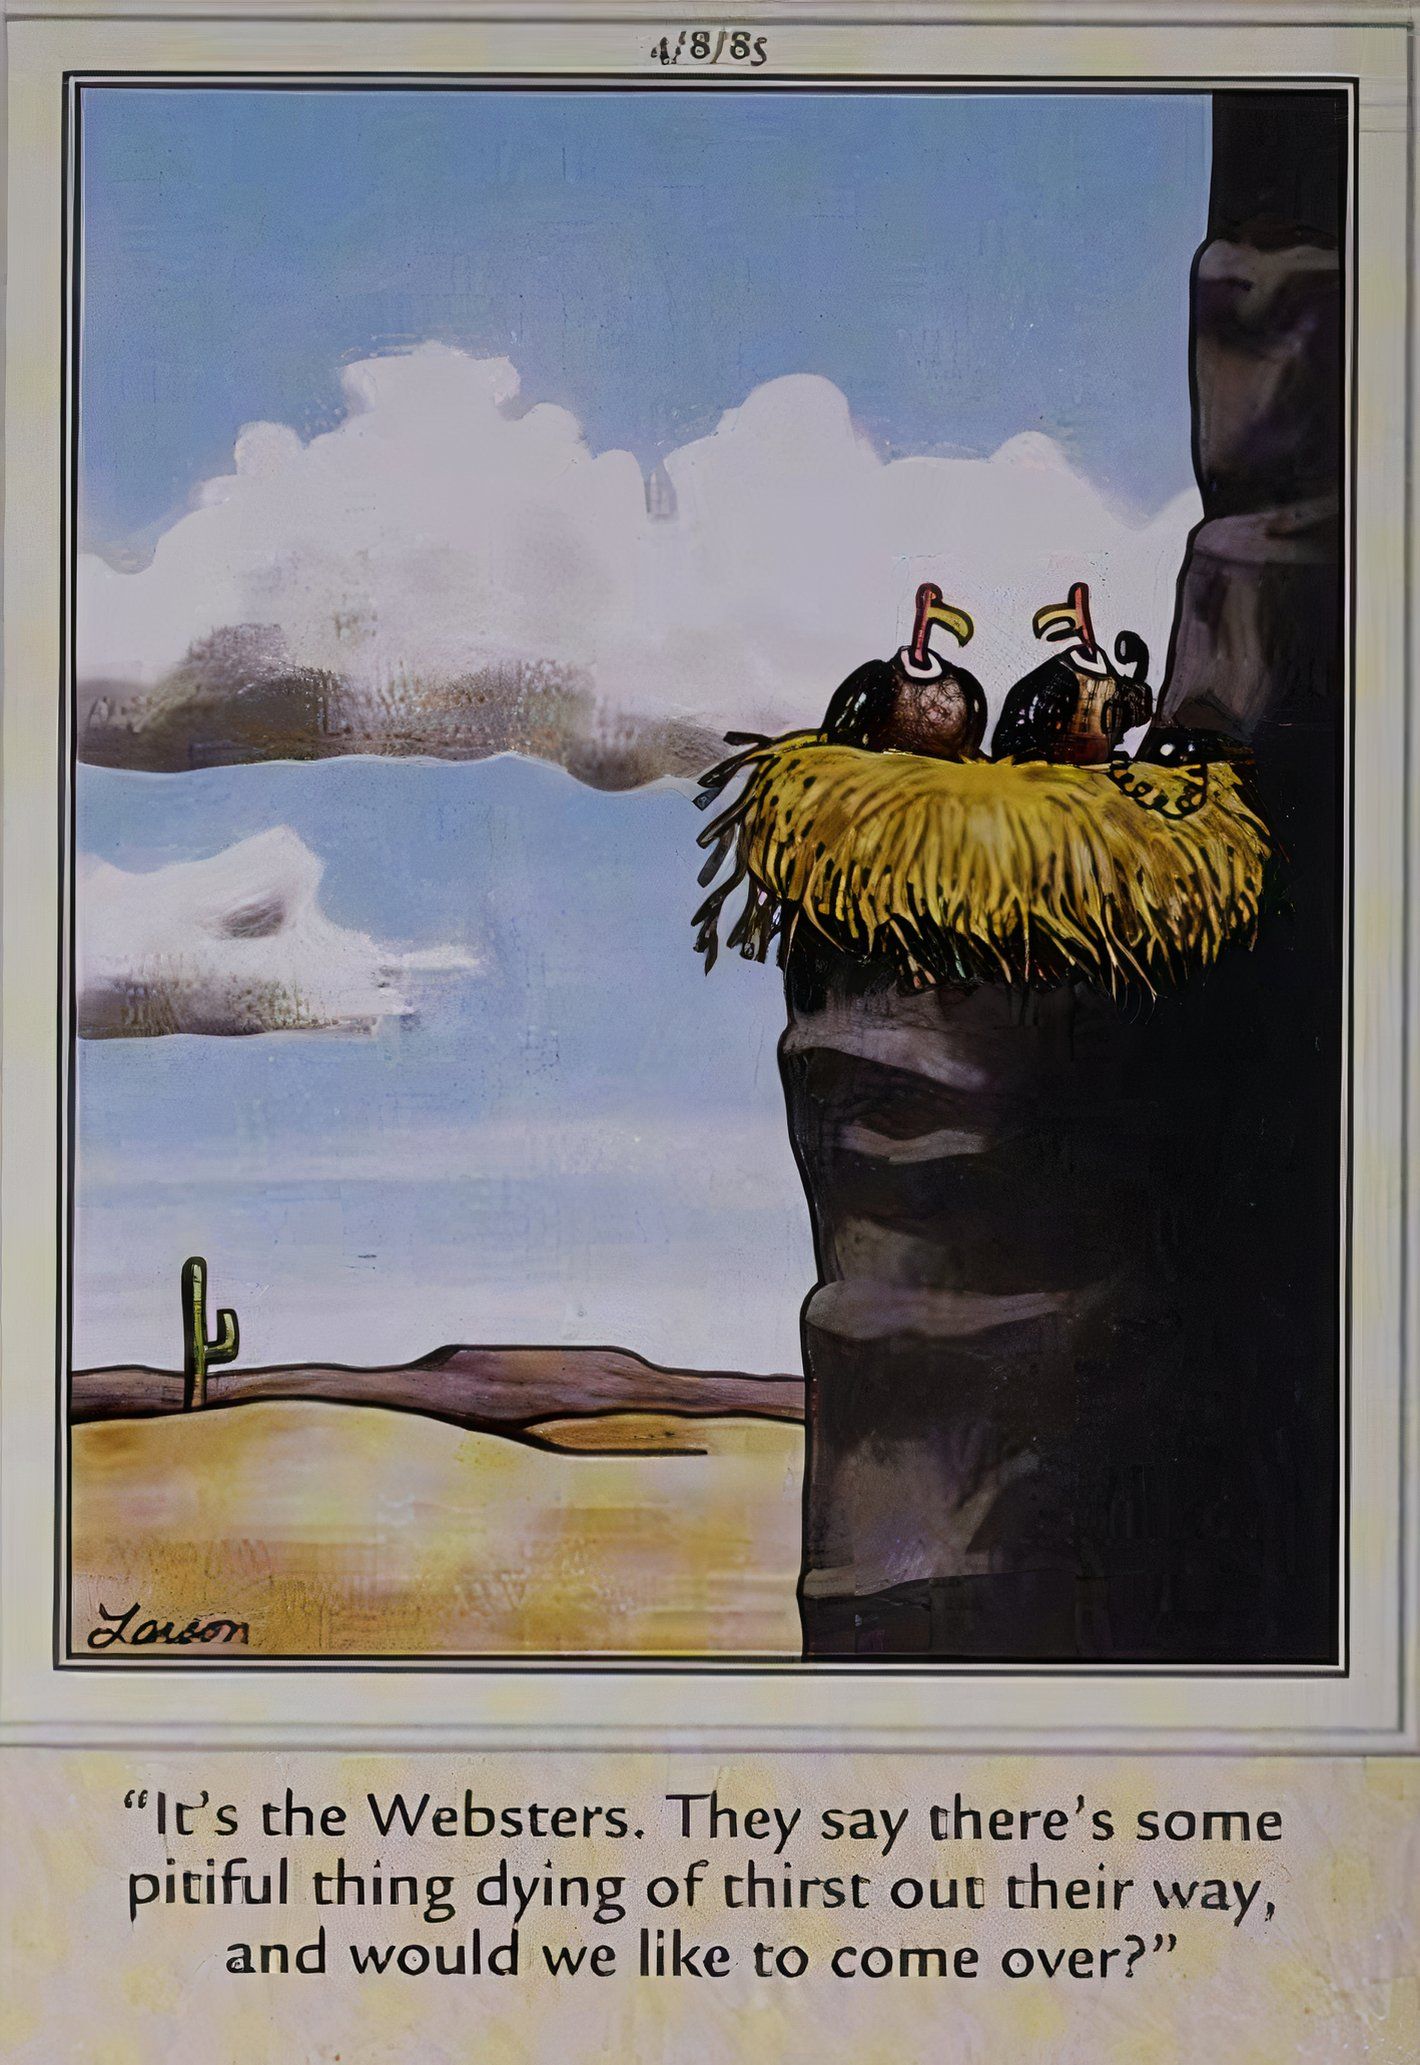 Far Side, vultures in their nest discuss going over to another bird family's to eat carrion